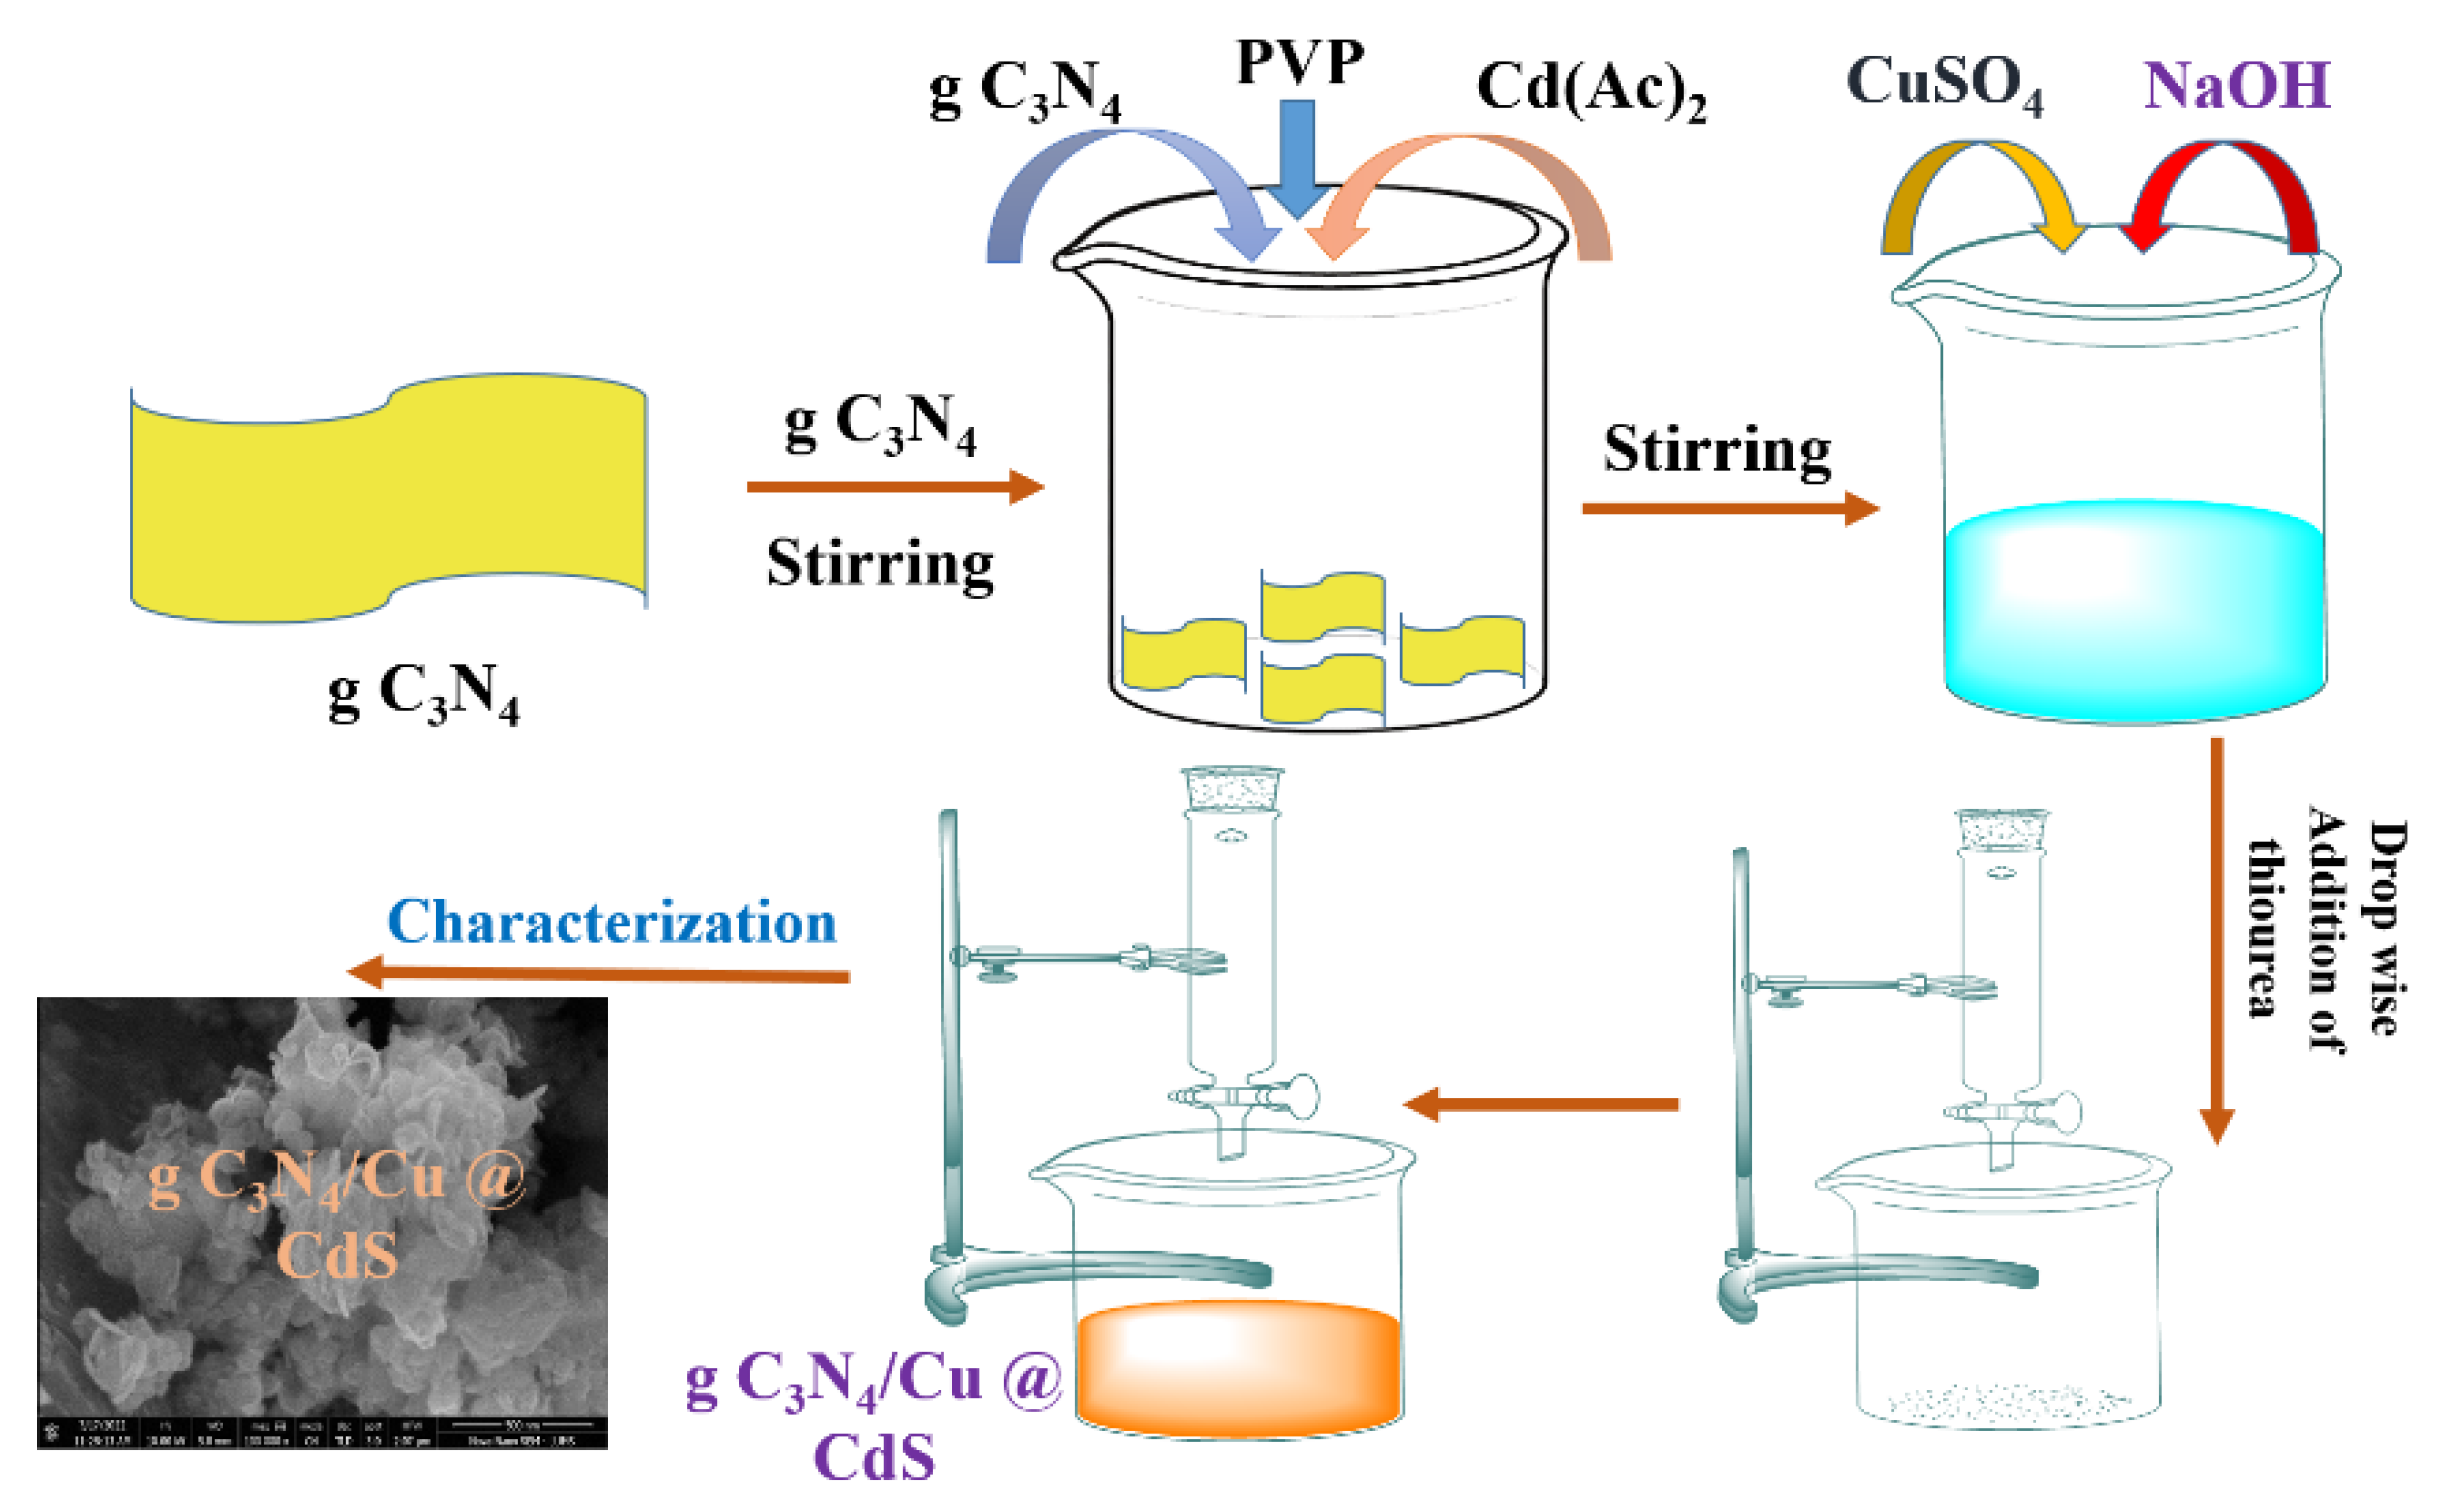 Toxics | Free Full-Text | Fabrication of a Ternary Nanocomposite g-C3N4/Cu@ CdS with Superior Charge Separation for Removal of Organic Pollutants and  Bacterial Disinfection from Wastewater under Sunlight Illumination